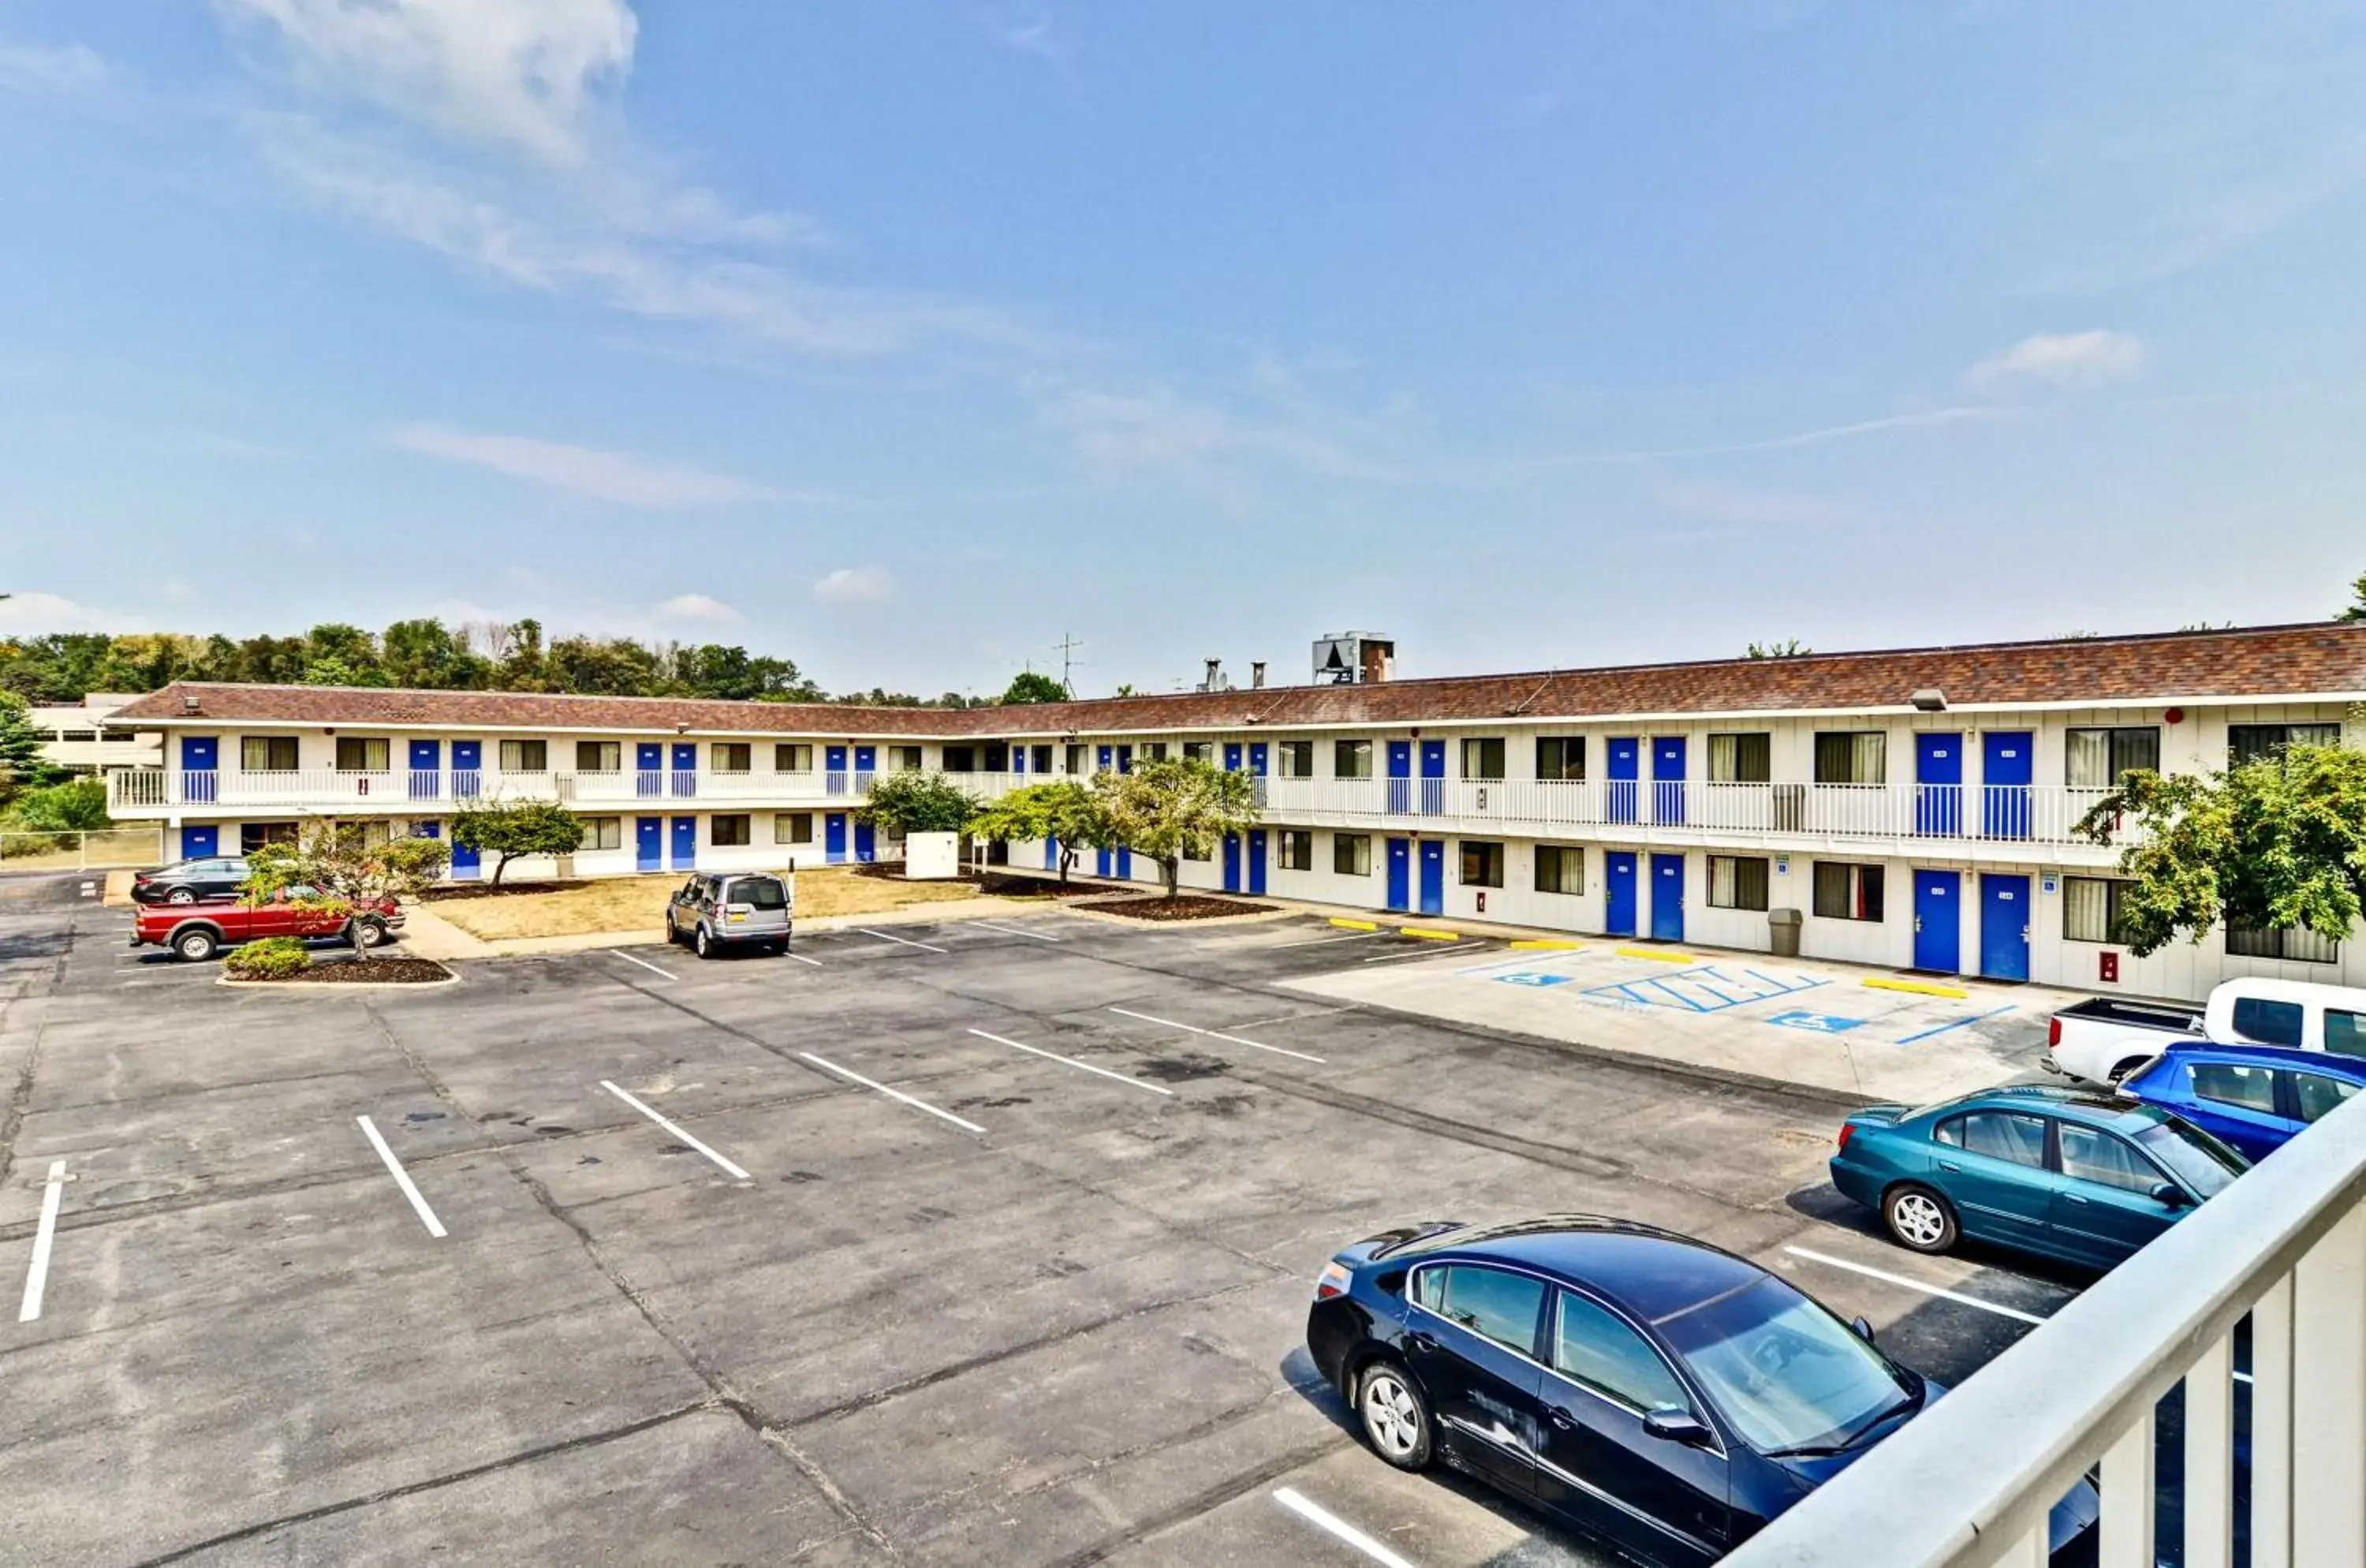 Property building in Motel 6-Pittsburgh, PA - Crafton